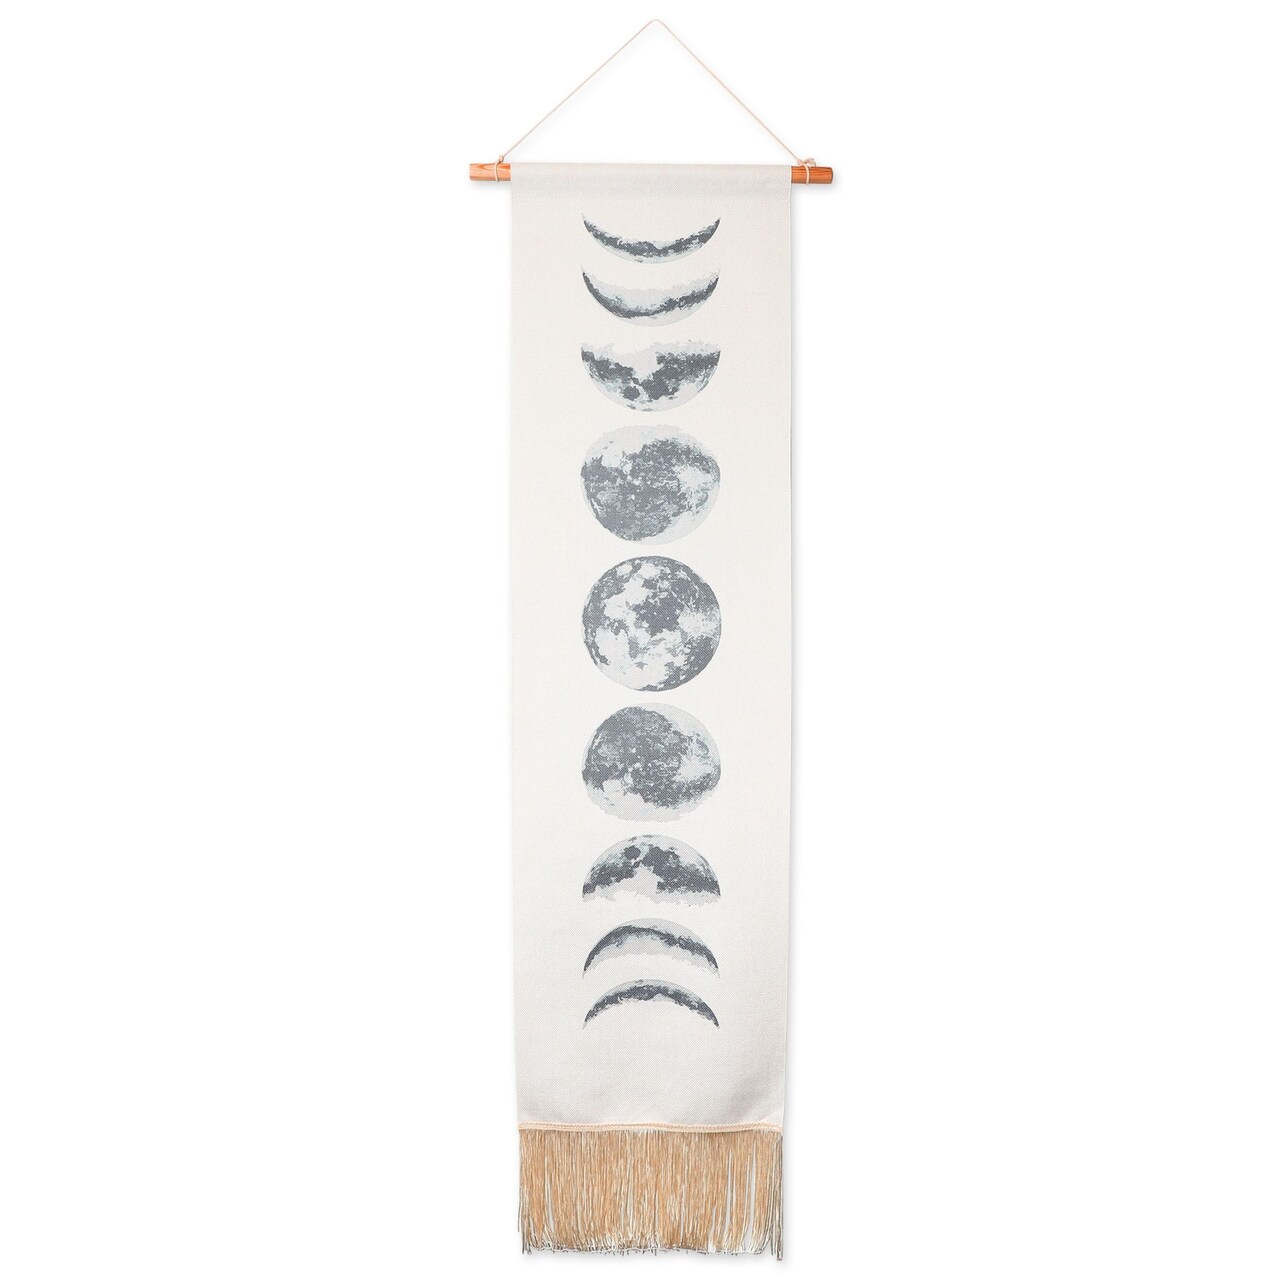 Bohemian Style Moon Phases Tapestry Hanging Wall Art for Home Decor (White, 12 x 49 In)